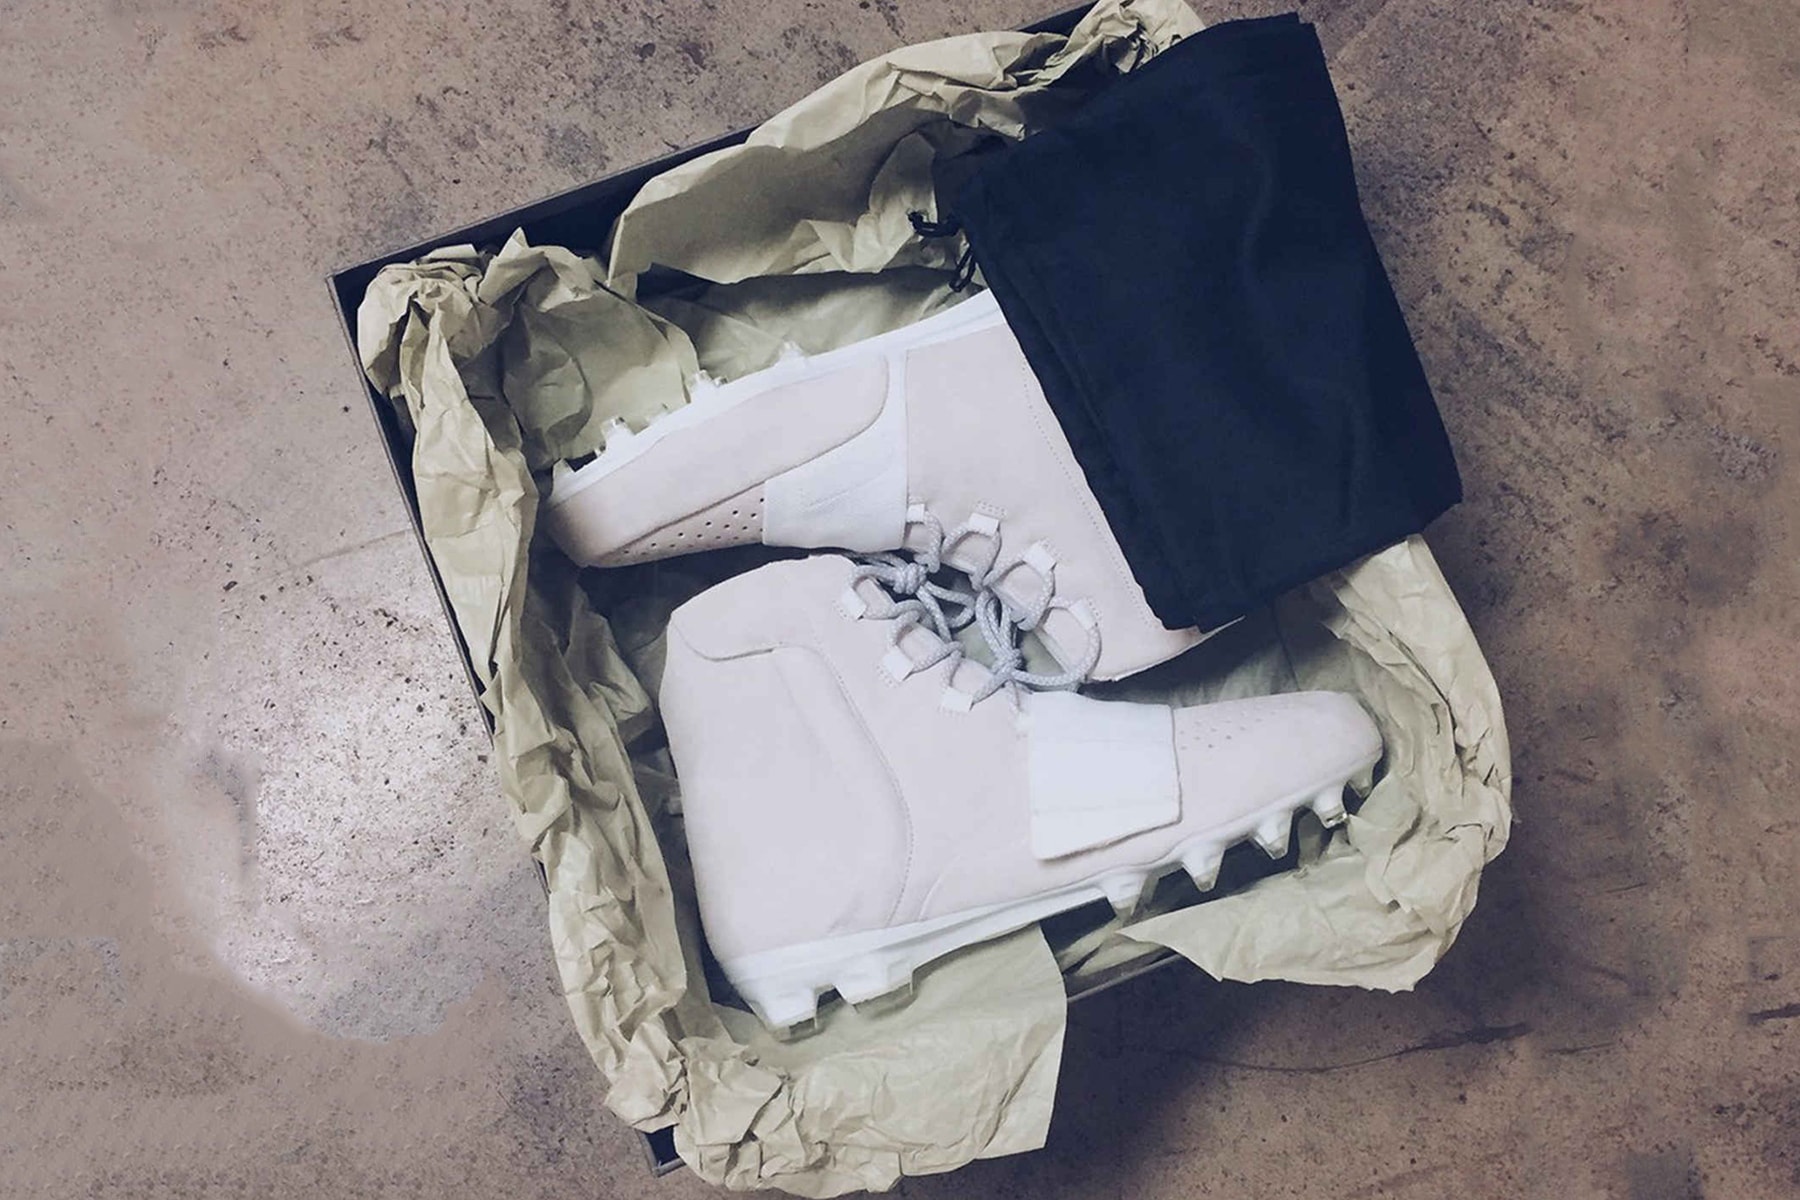 Von Miller's adidas Yeezy Boost 750 Cleats for NFL Kickoff Game off white kanye west ye